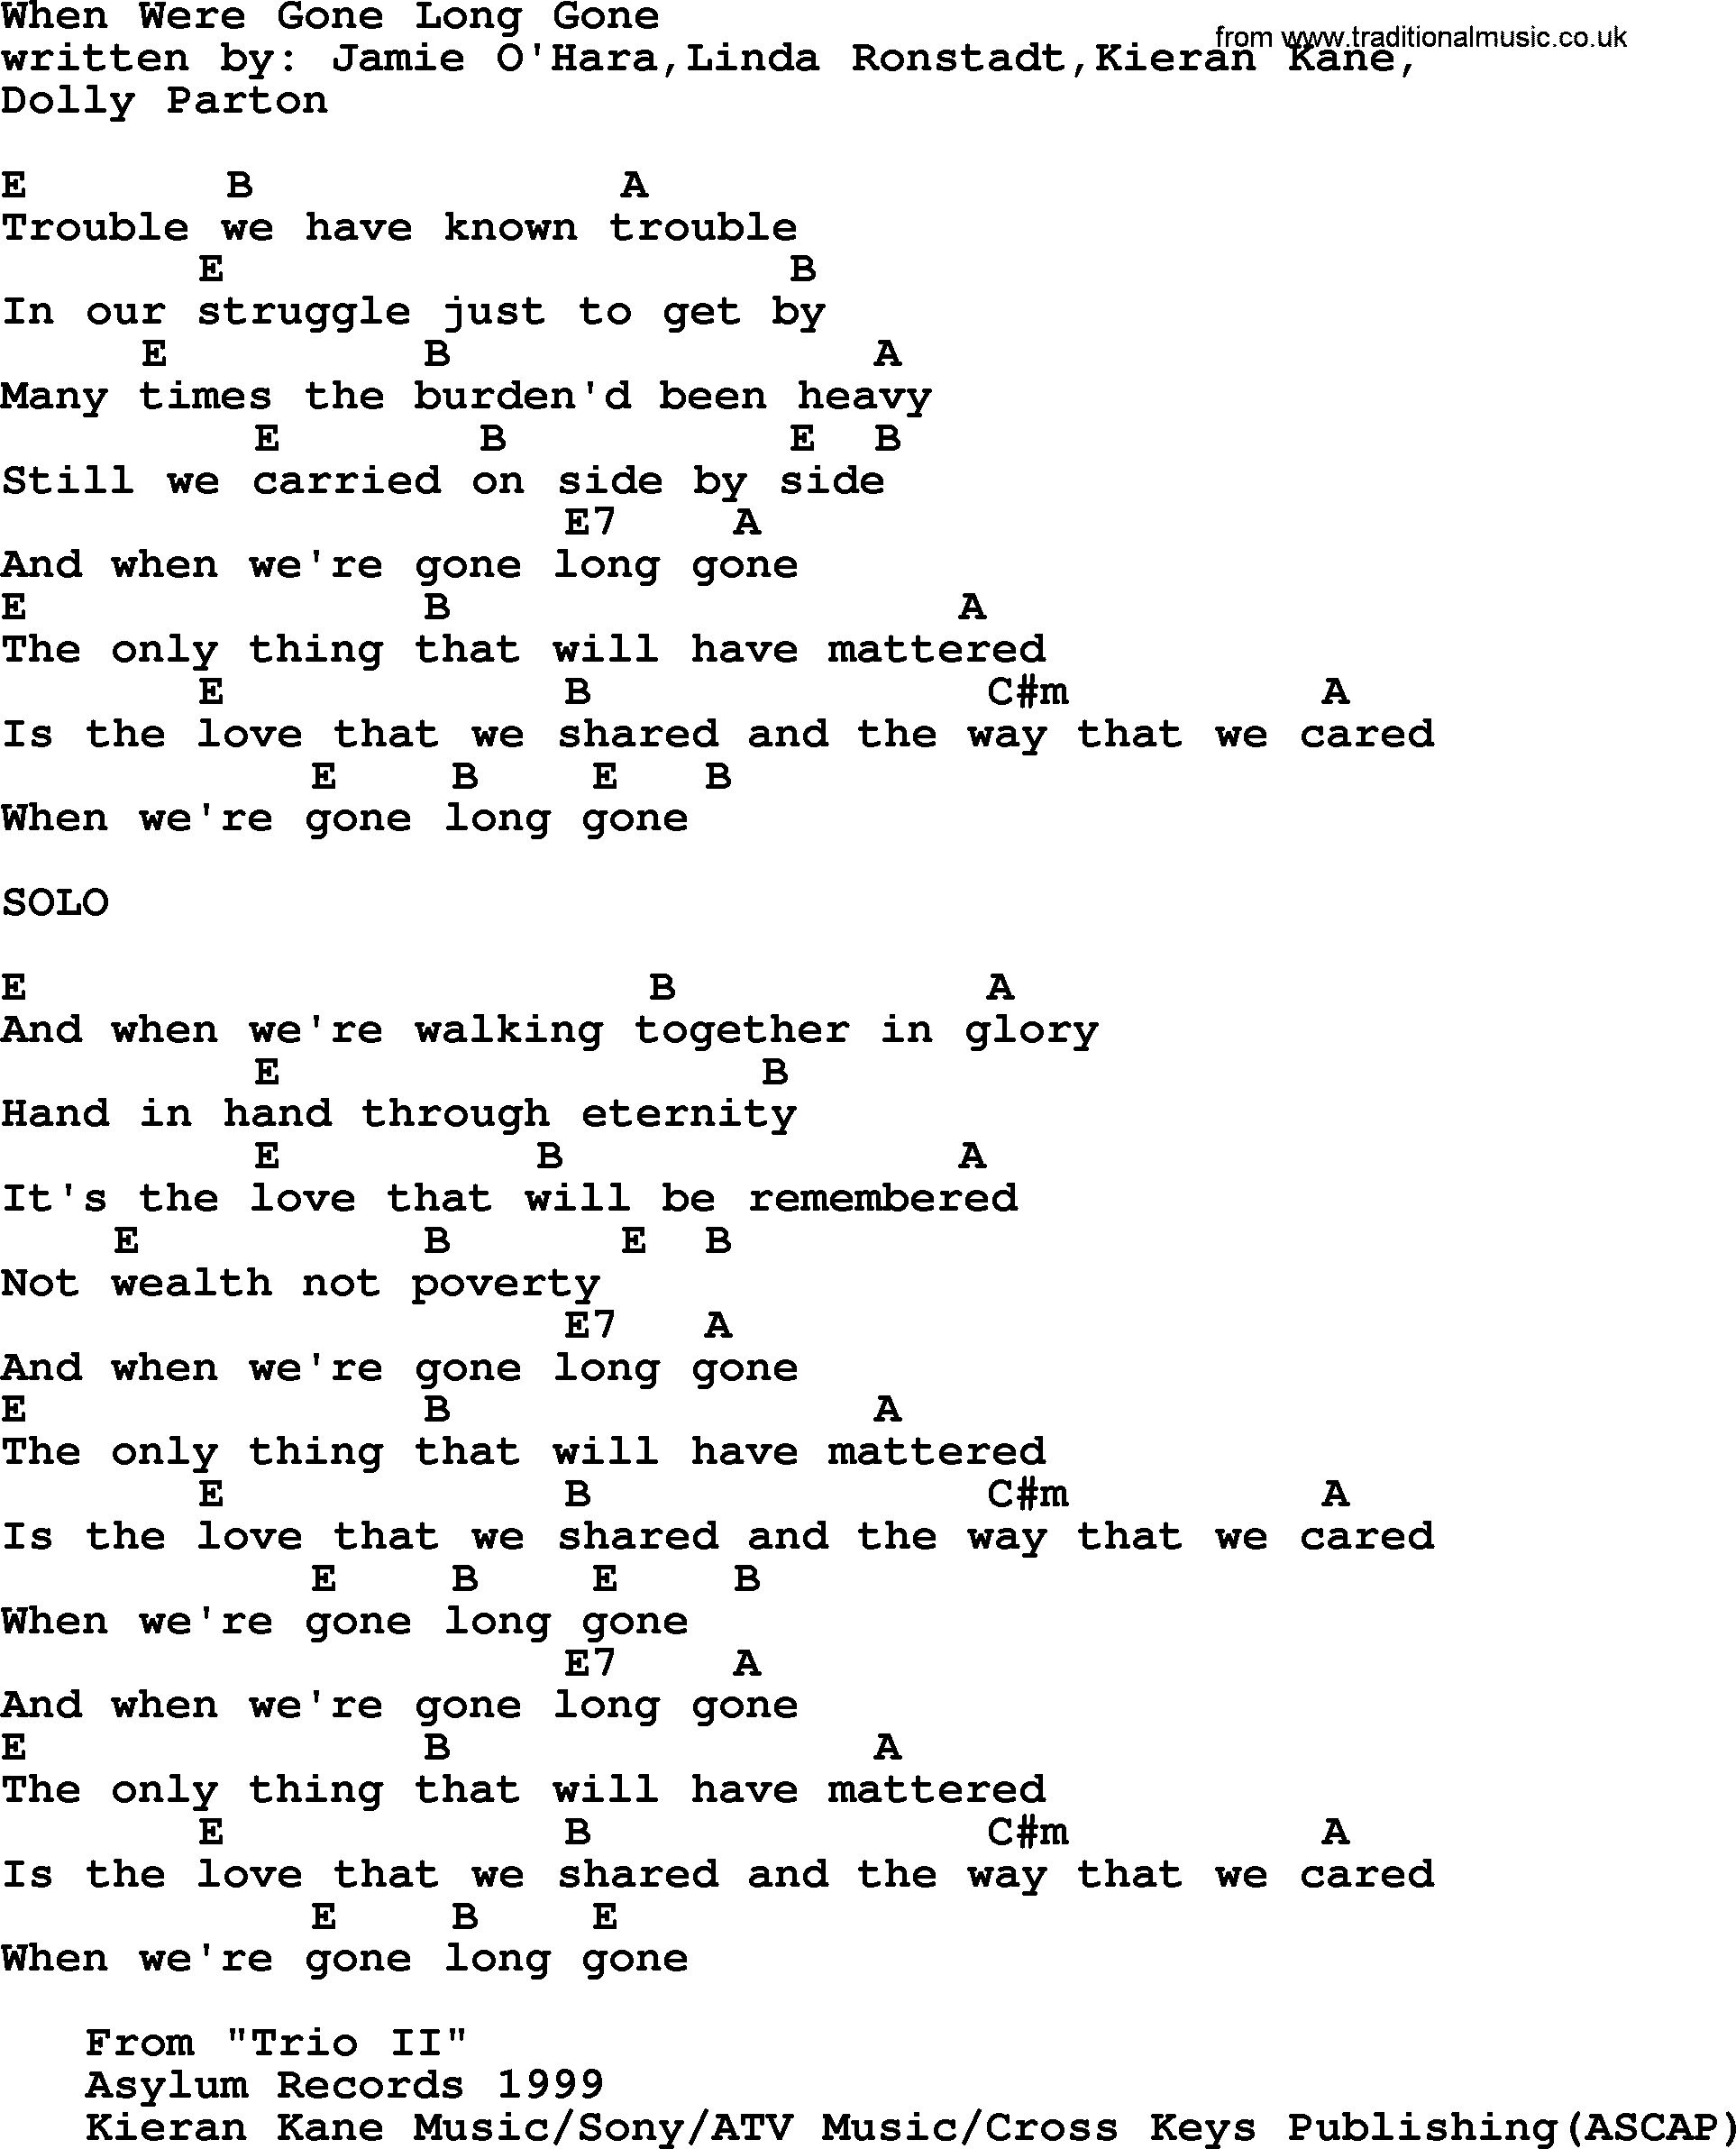 Emmylou Harris song: When Were Gone Long Gone lyrics and chords